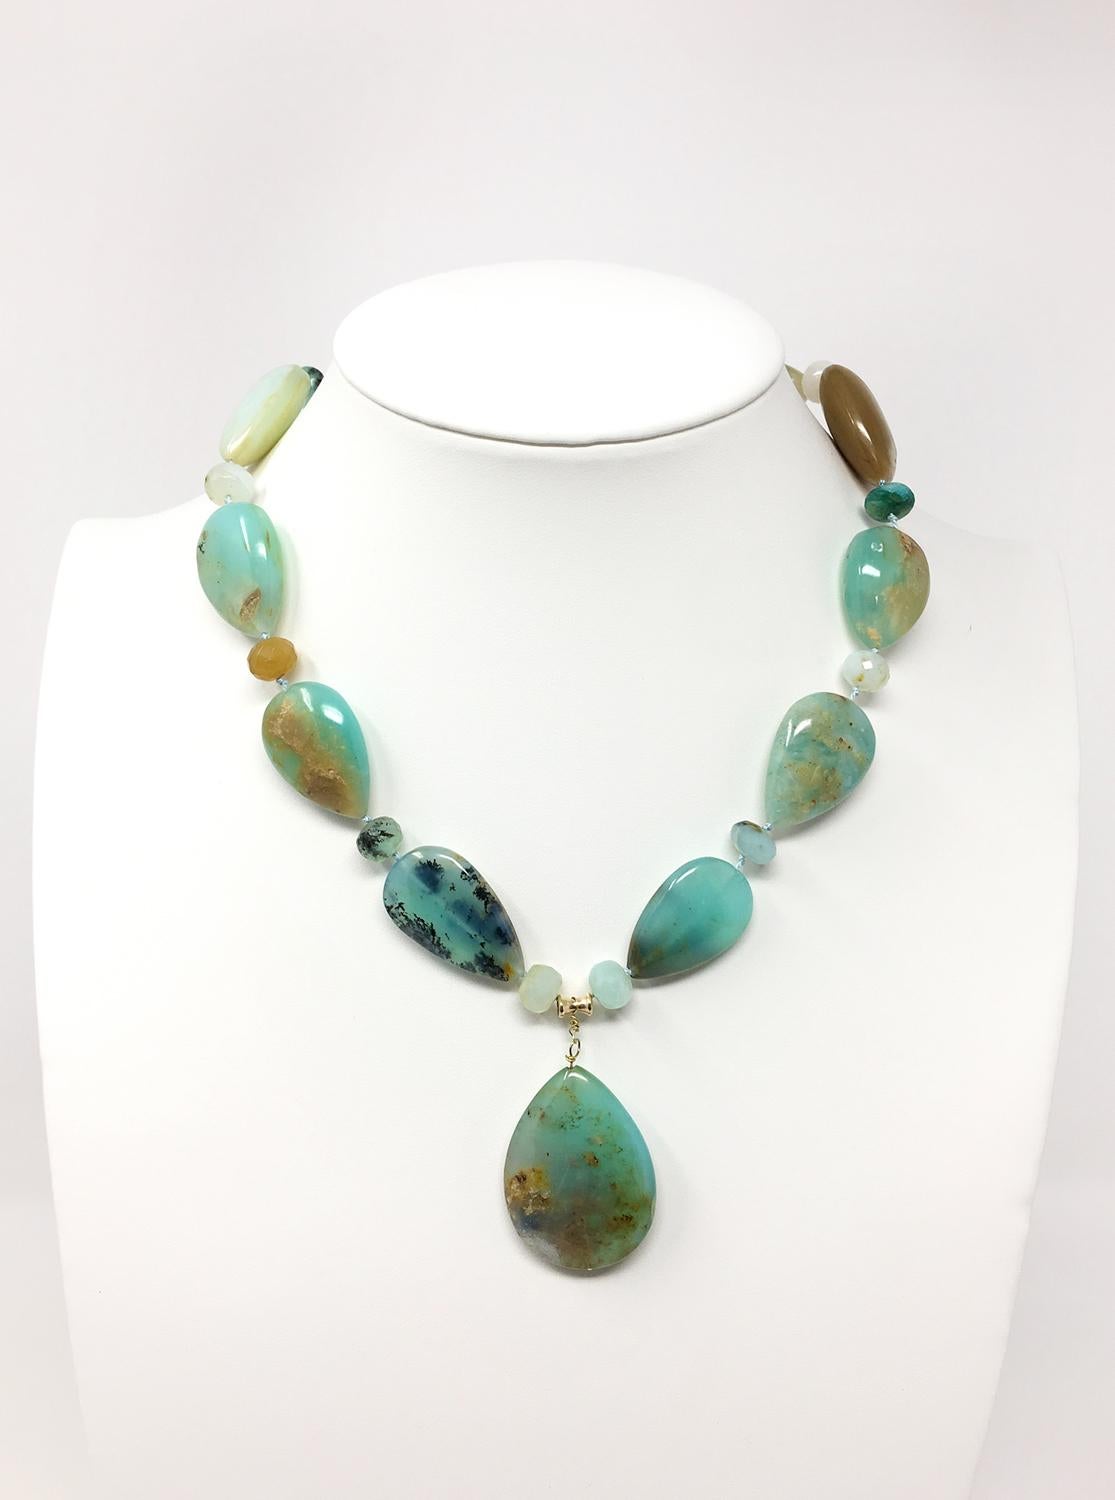 Natural Peruvian Opals Mixed colors Large Teardrop Necklace: 18KT and 14KT Gold.  Stunning large teardrop opals strung on a modern silk cord, gold french wire. 18KT gold clasp, 14KT gold spacer.  18KT GF beads and Gold french wire. No wear. Length